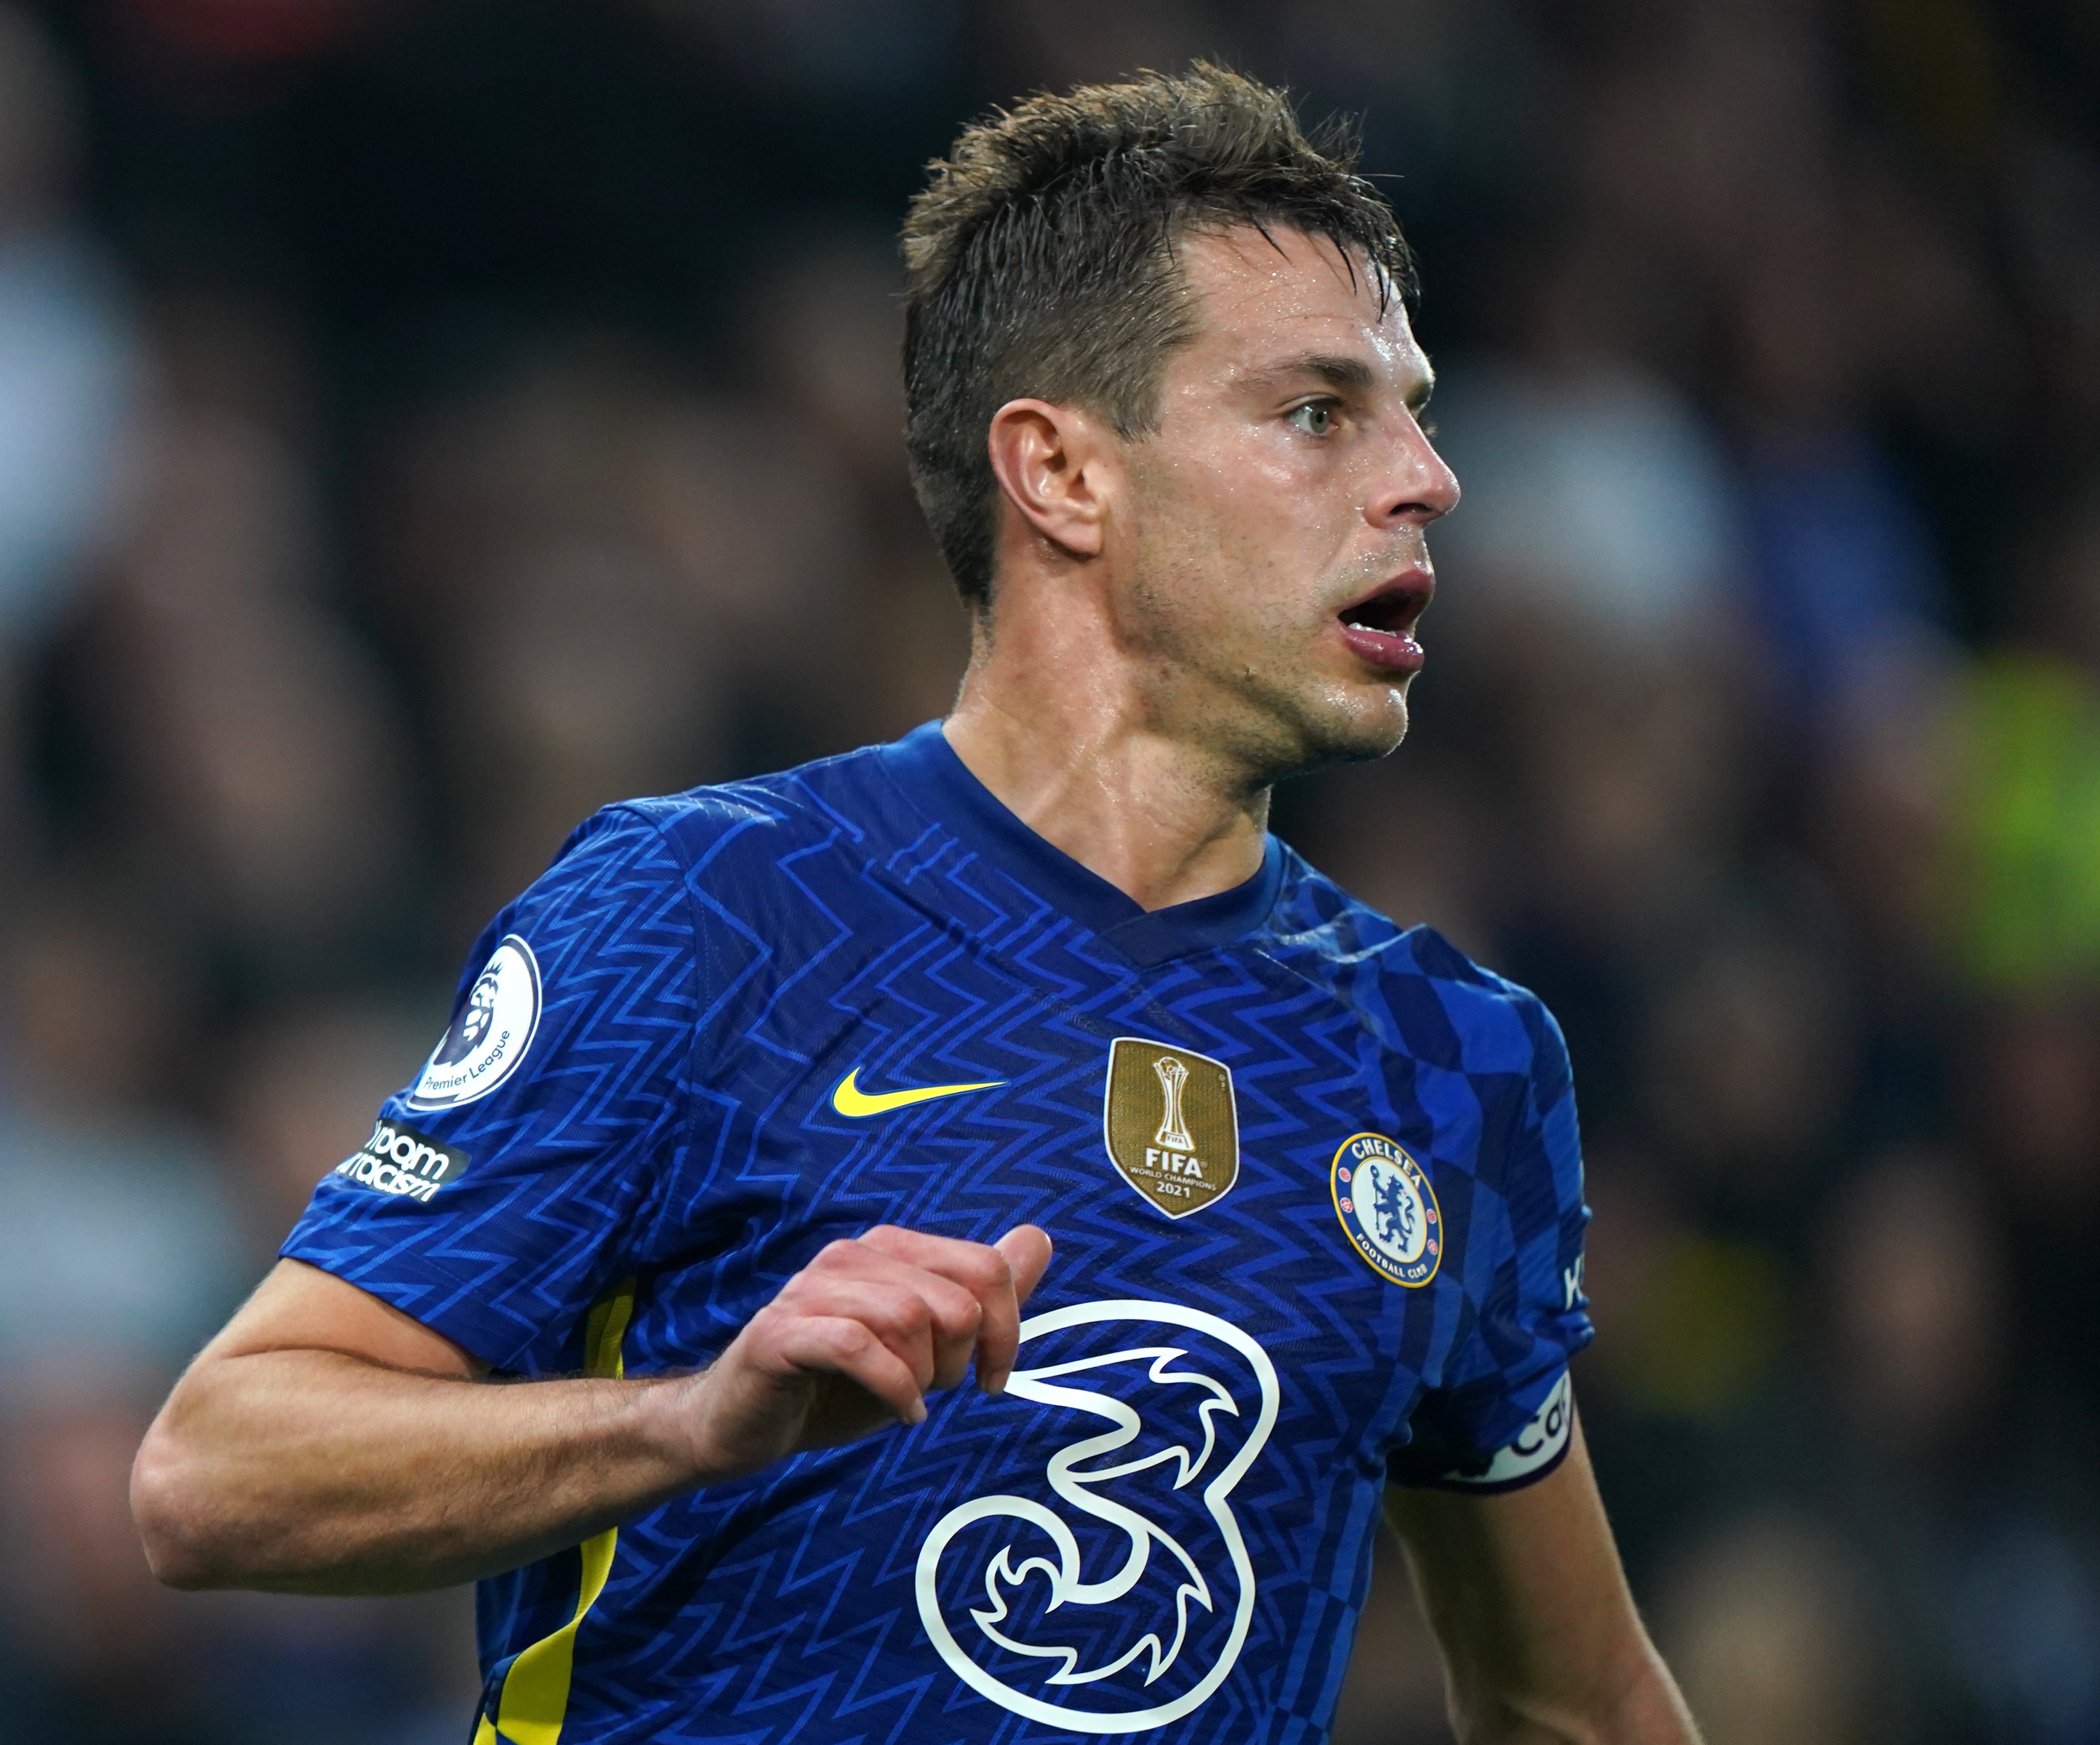 Thomas Tuchel has admitted Chelsea are still talking to Cesar Azpilicueta, pictured, about his Stamford Bridge future (Joe Giddens/PA)